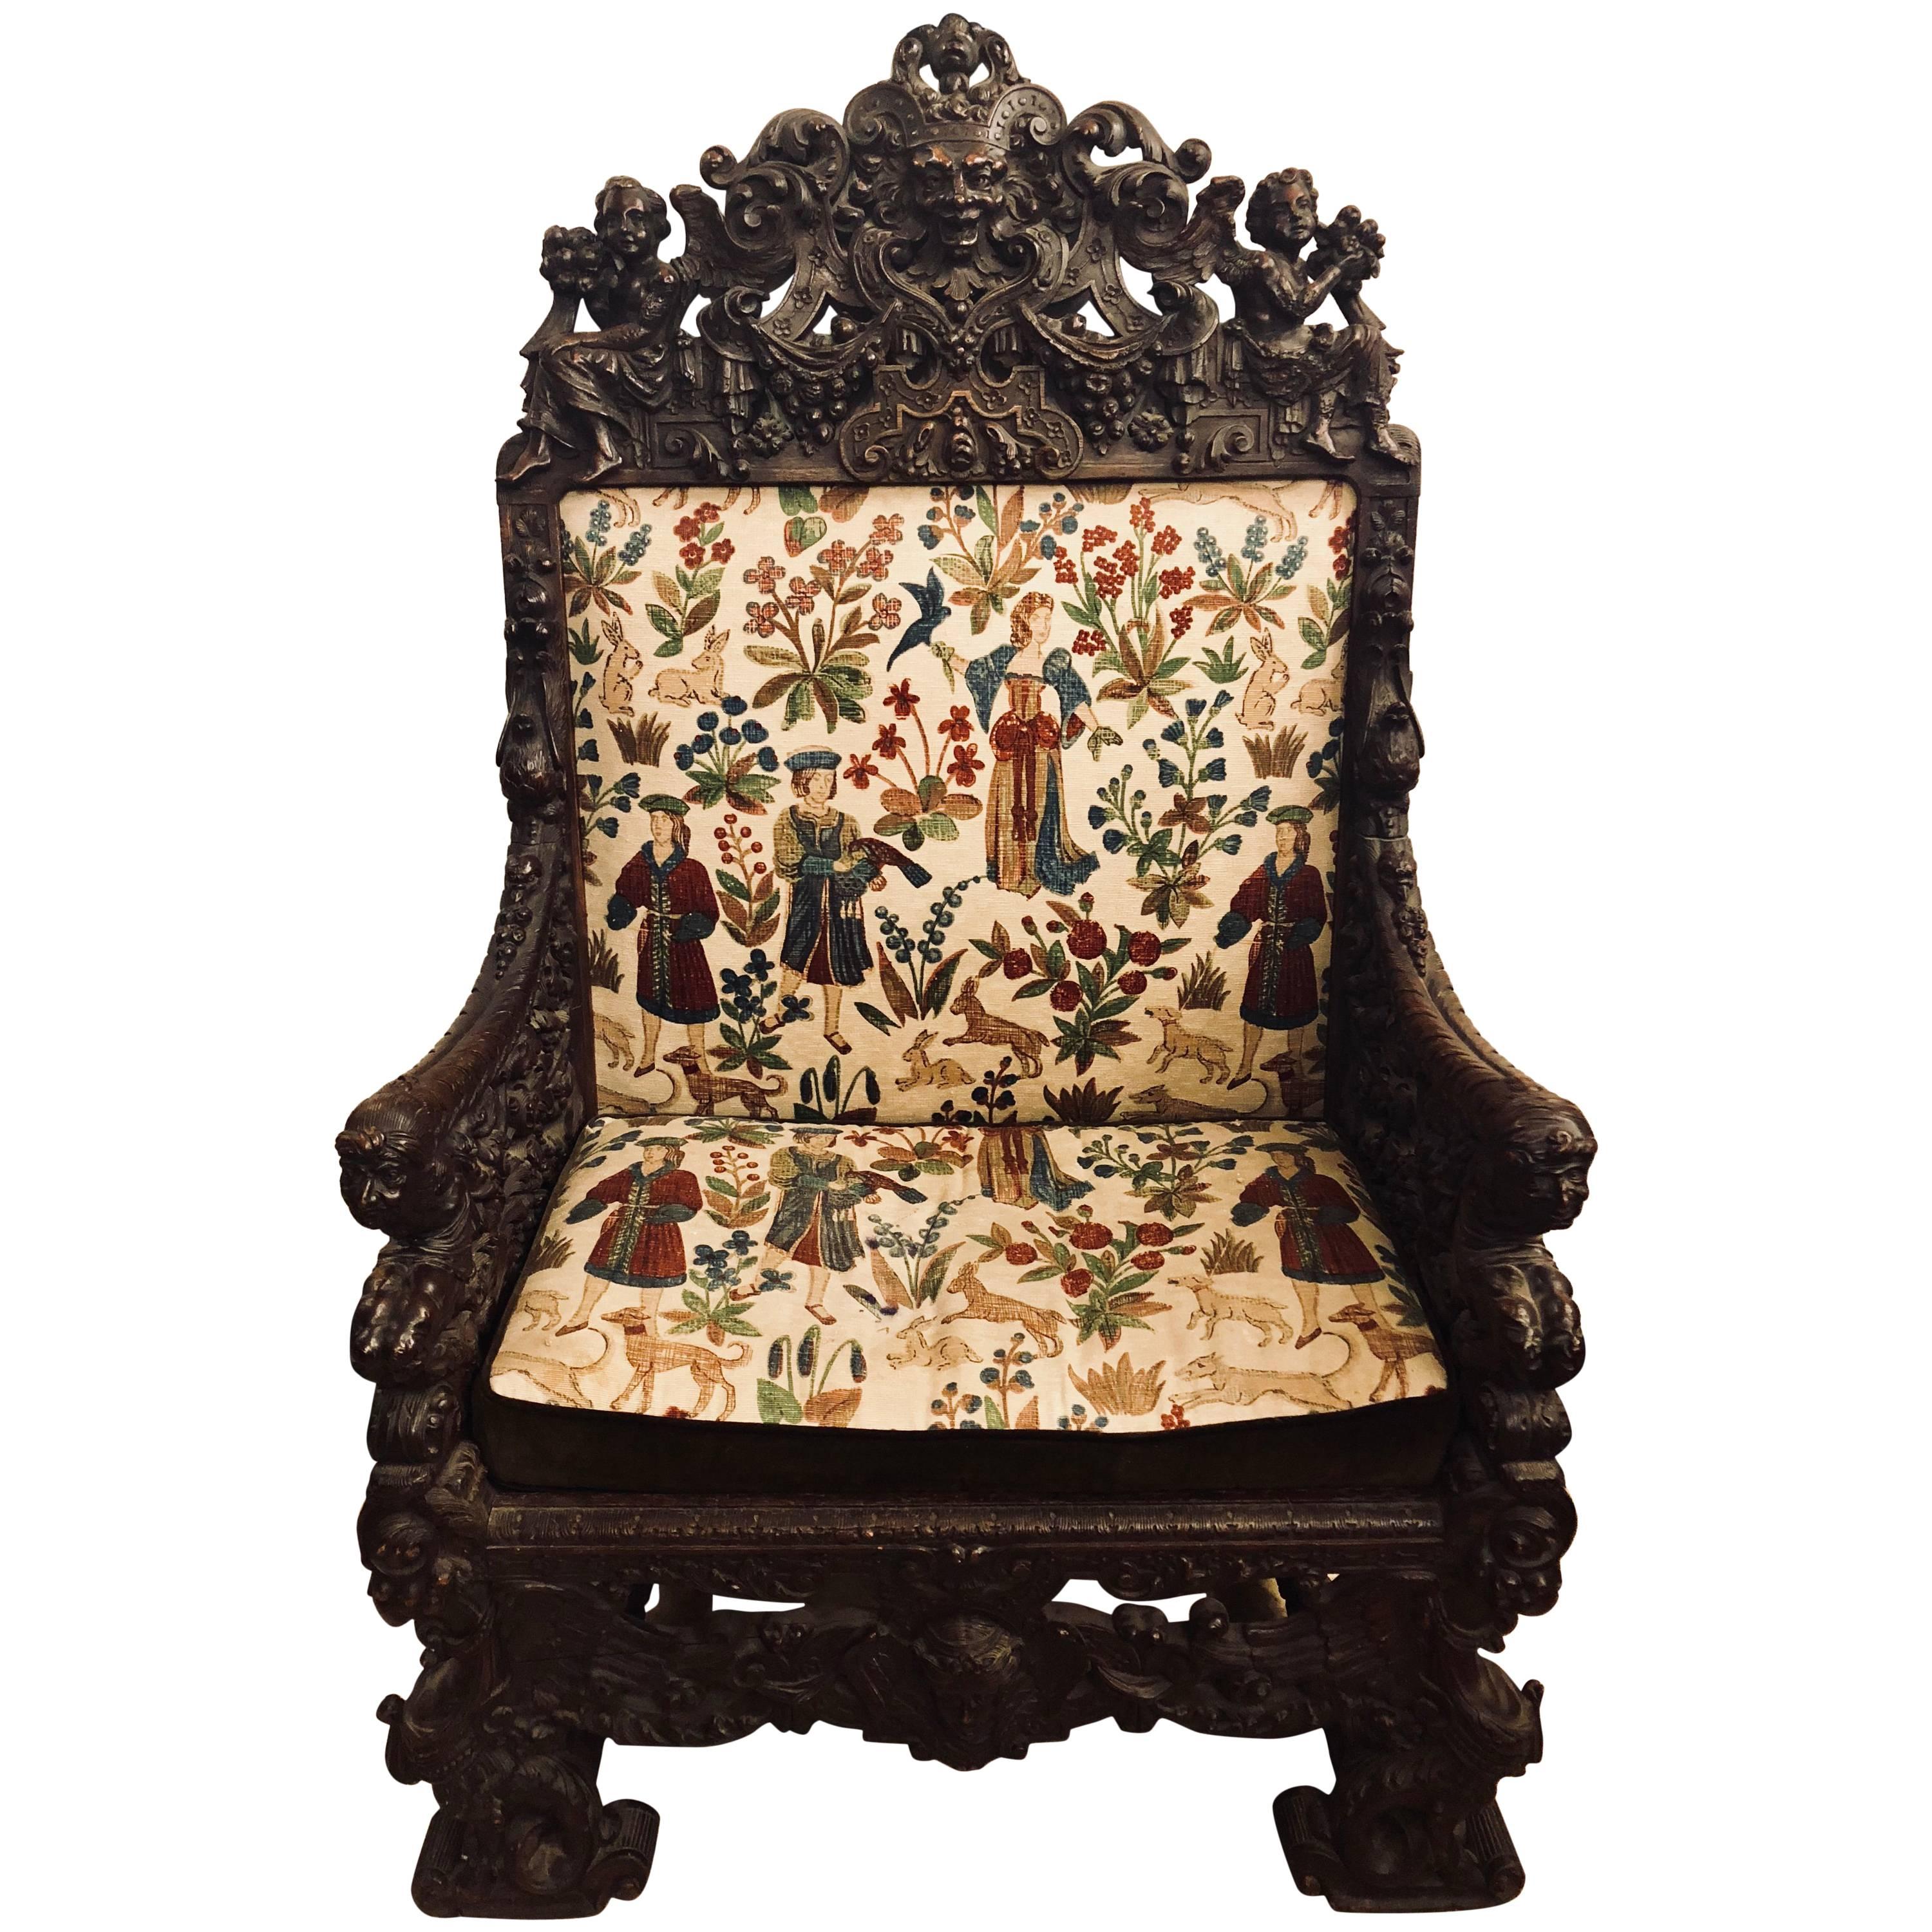 18th-19th Century Palatial Carved Throne or Armchair Manner of Horner Brothers